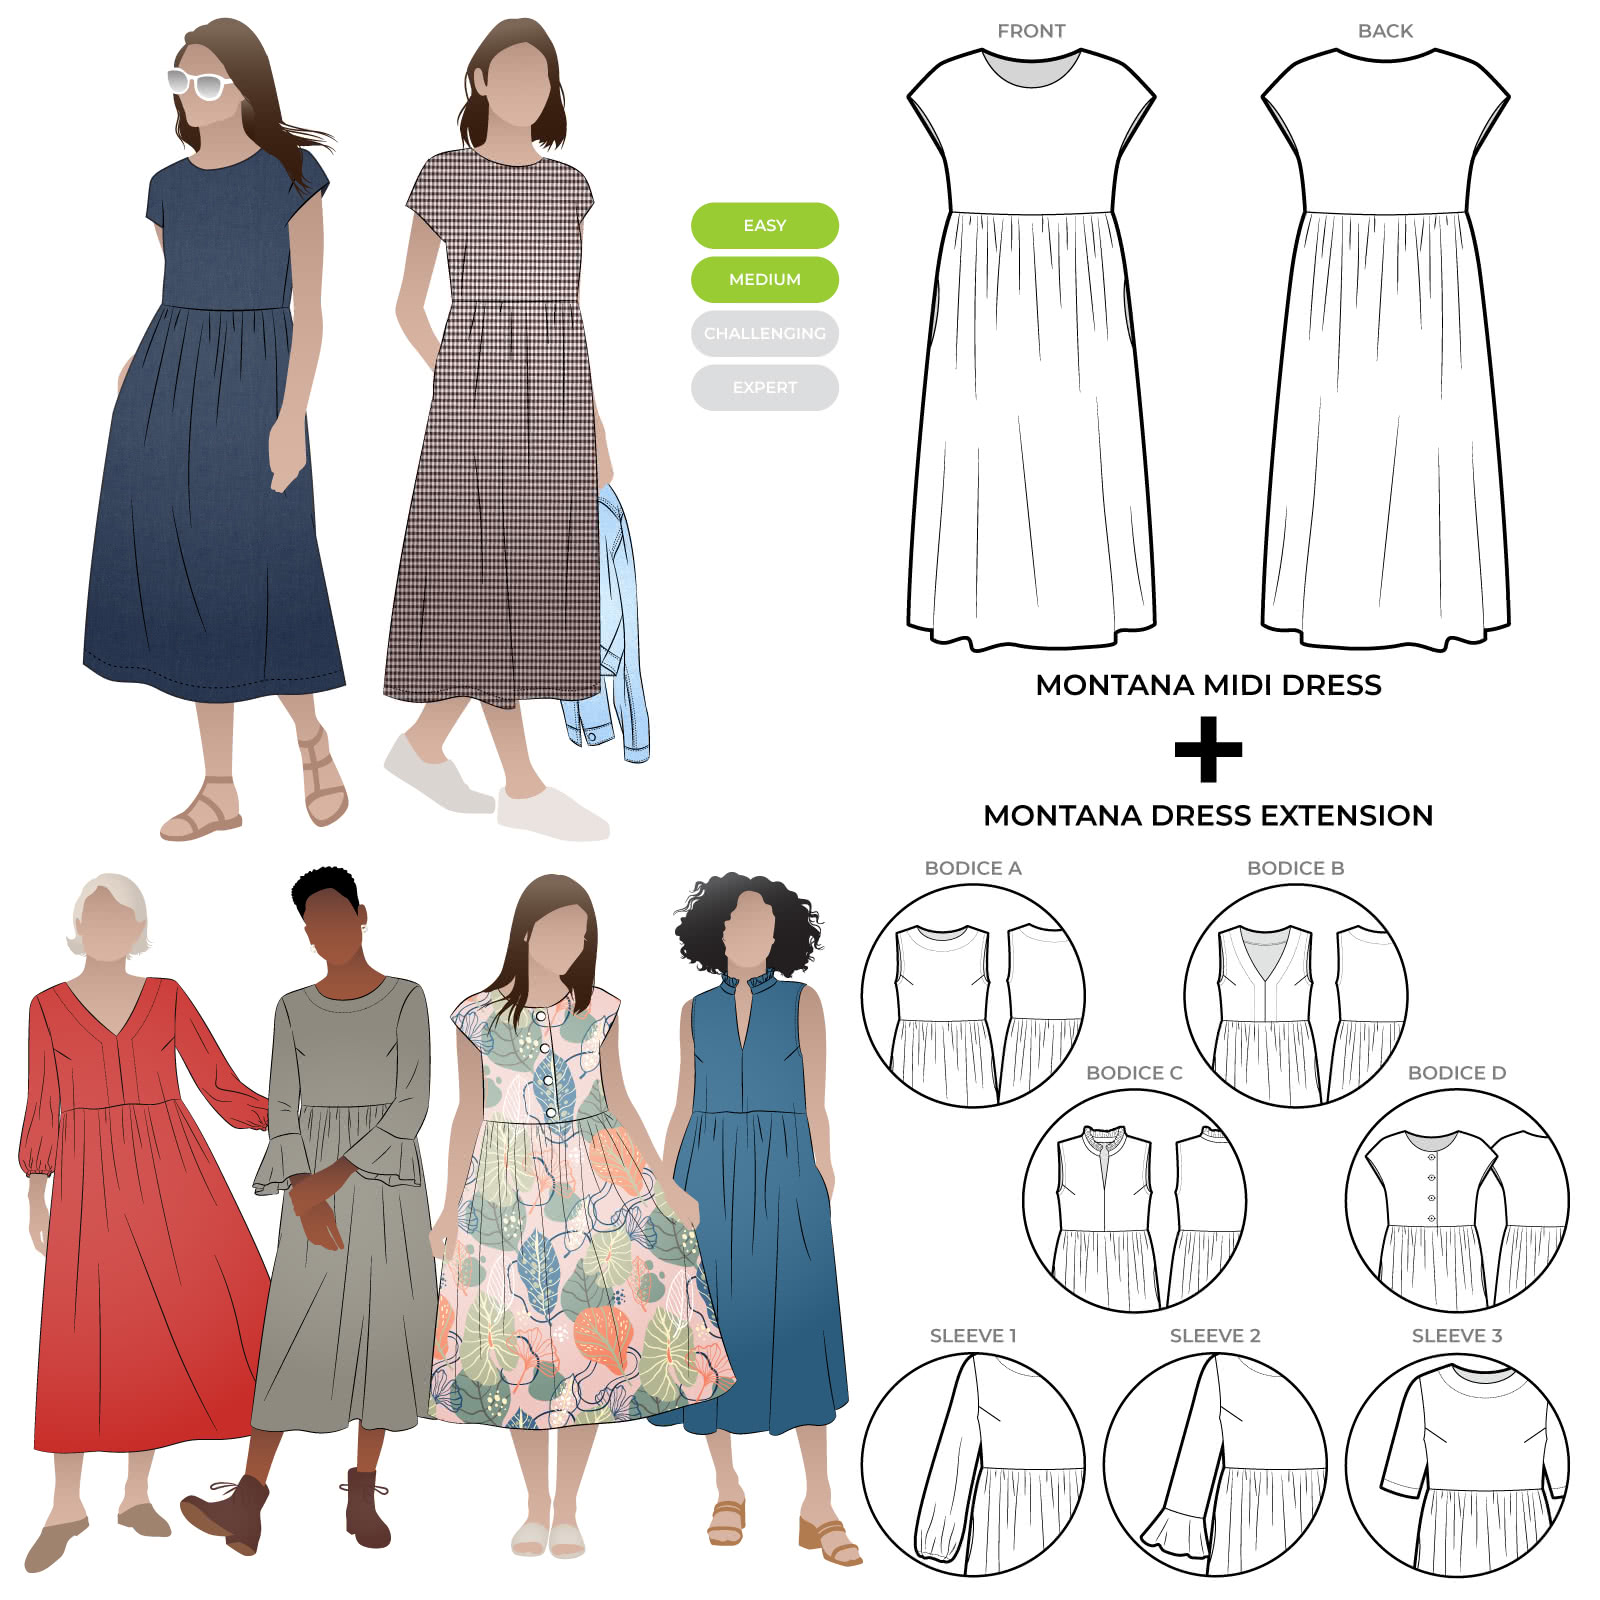 Montana Midi Dress and Extension Pack Sewing Pattern Bundle By Style Arc - Make over 12 different looks with the Montana Midi Dress + Extension Pack patterns.